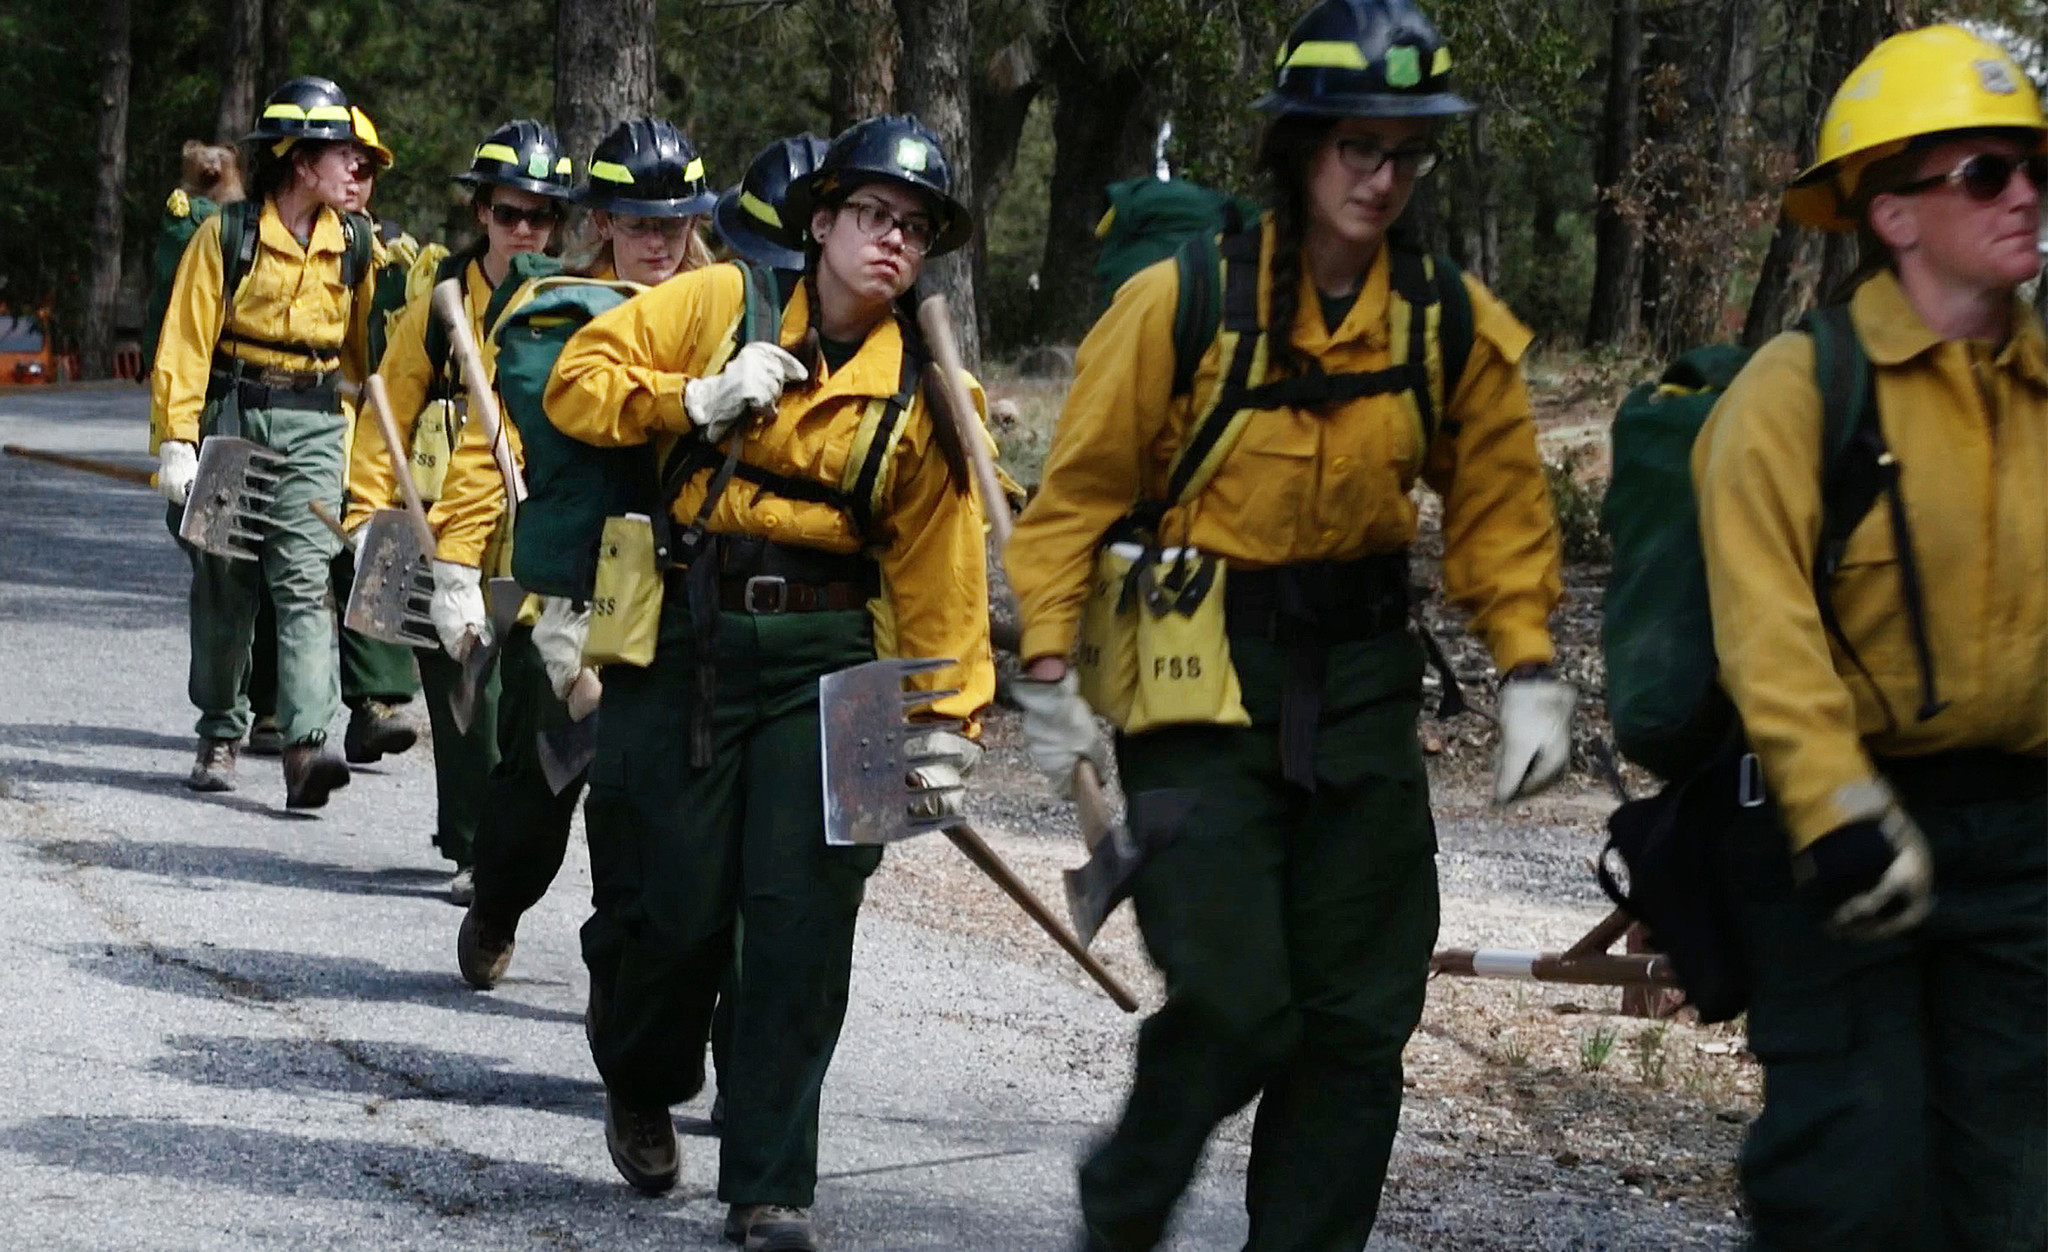 A trial by imaginary fire for women who want to fight real wildland flames  - Los Angeles Times